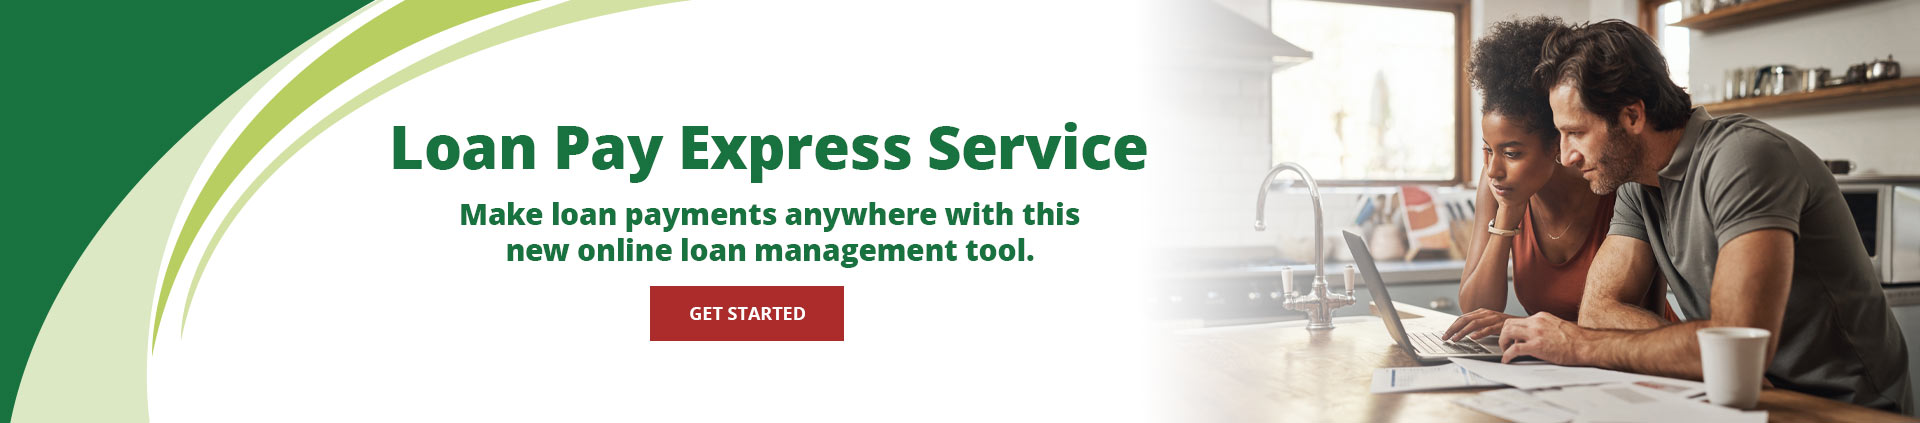 Loan Pay Express Service
Make loan payments anywhere with this new online loan management tool.
Get Started